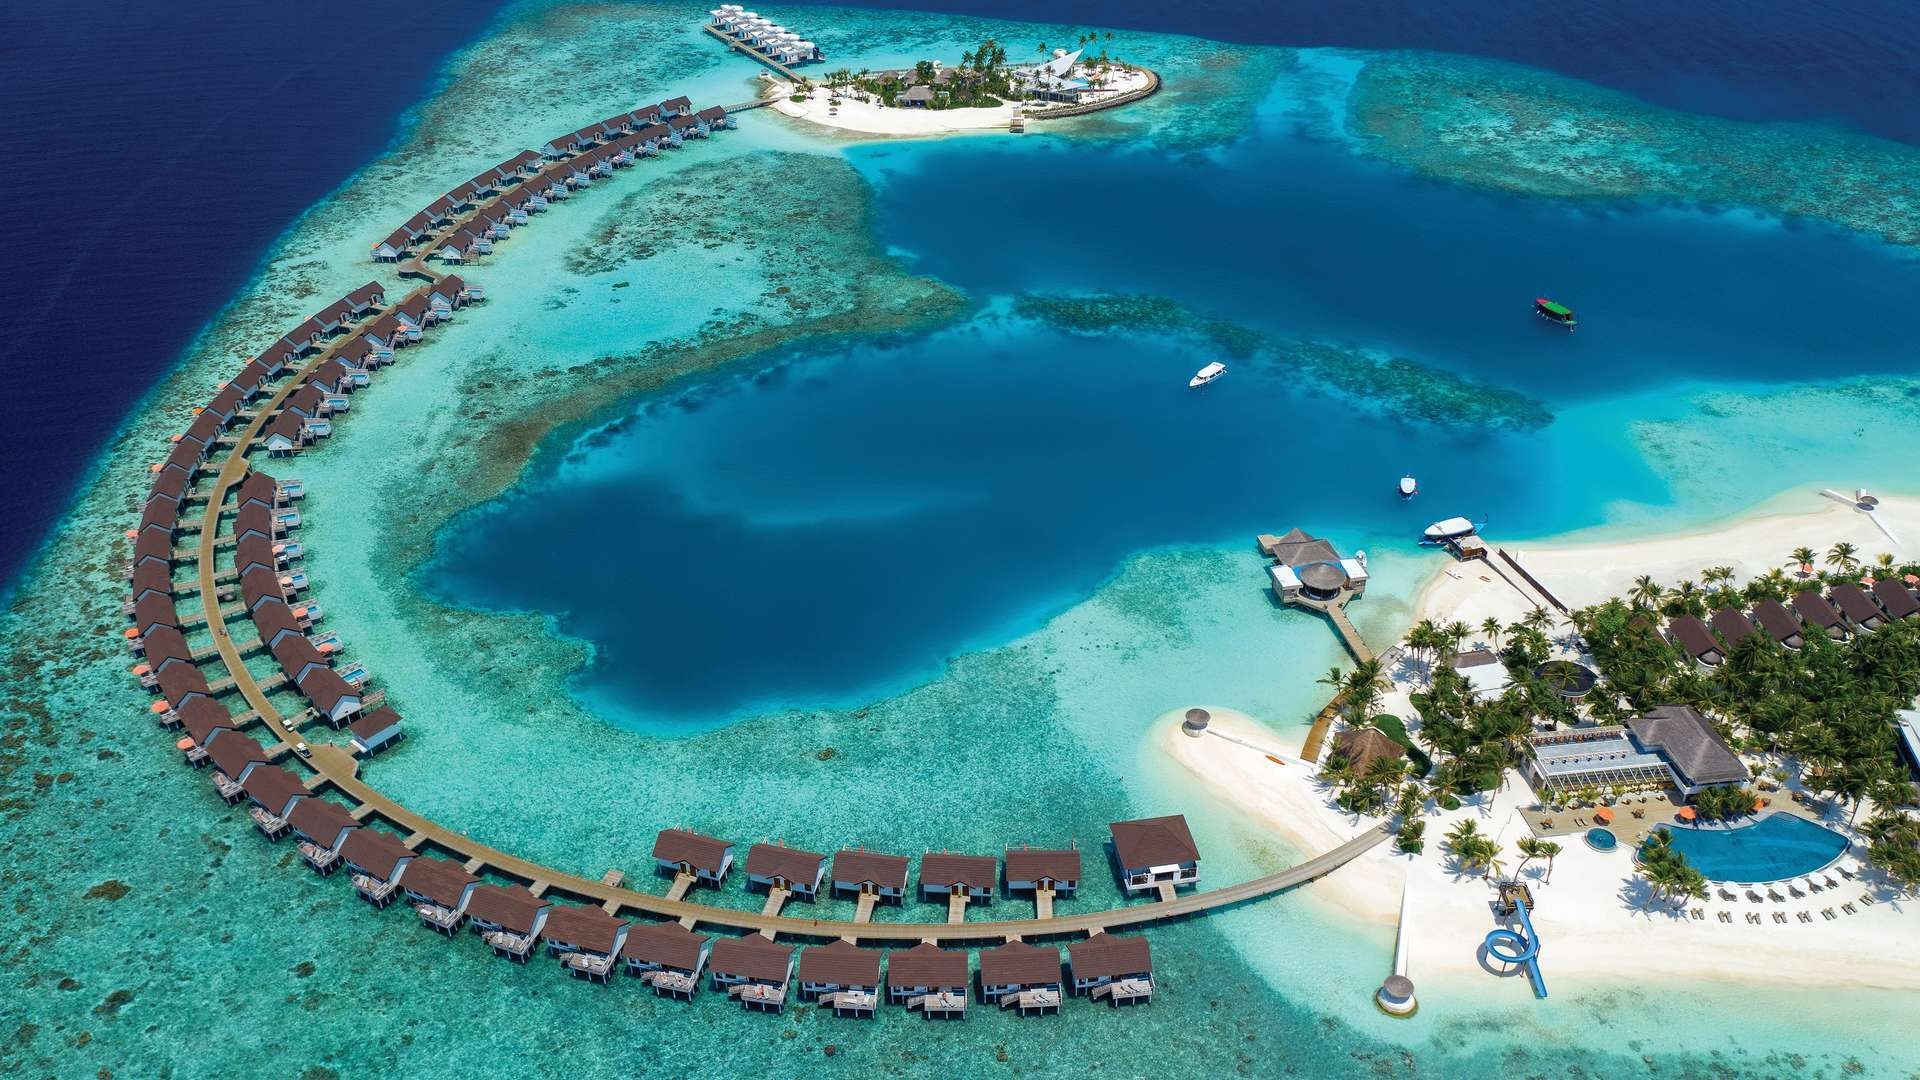 Maldives, Seychelles or Mauritius - which is better?